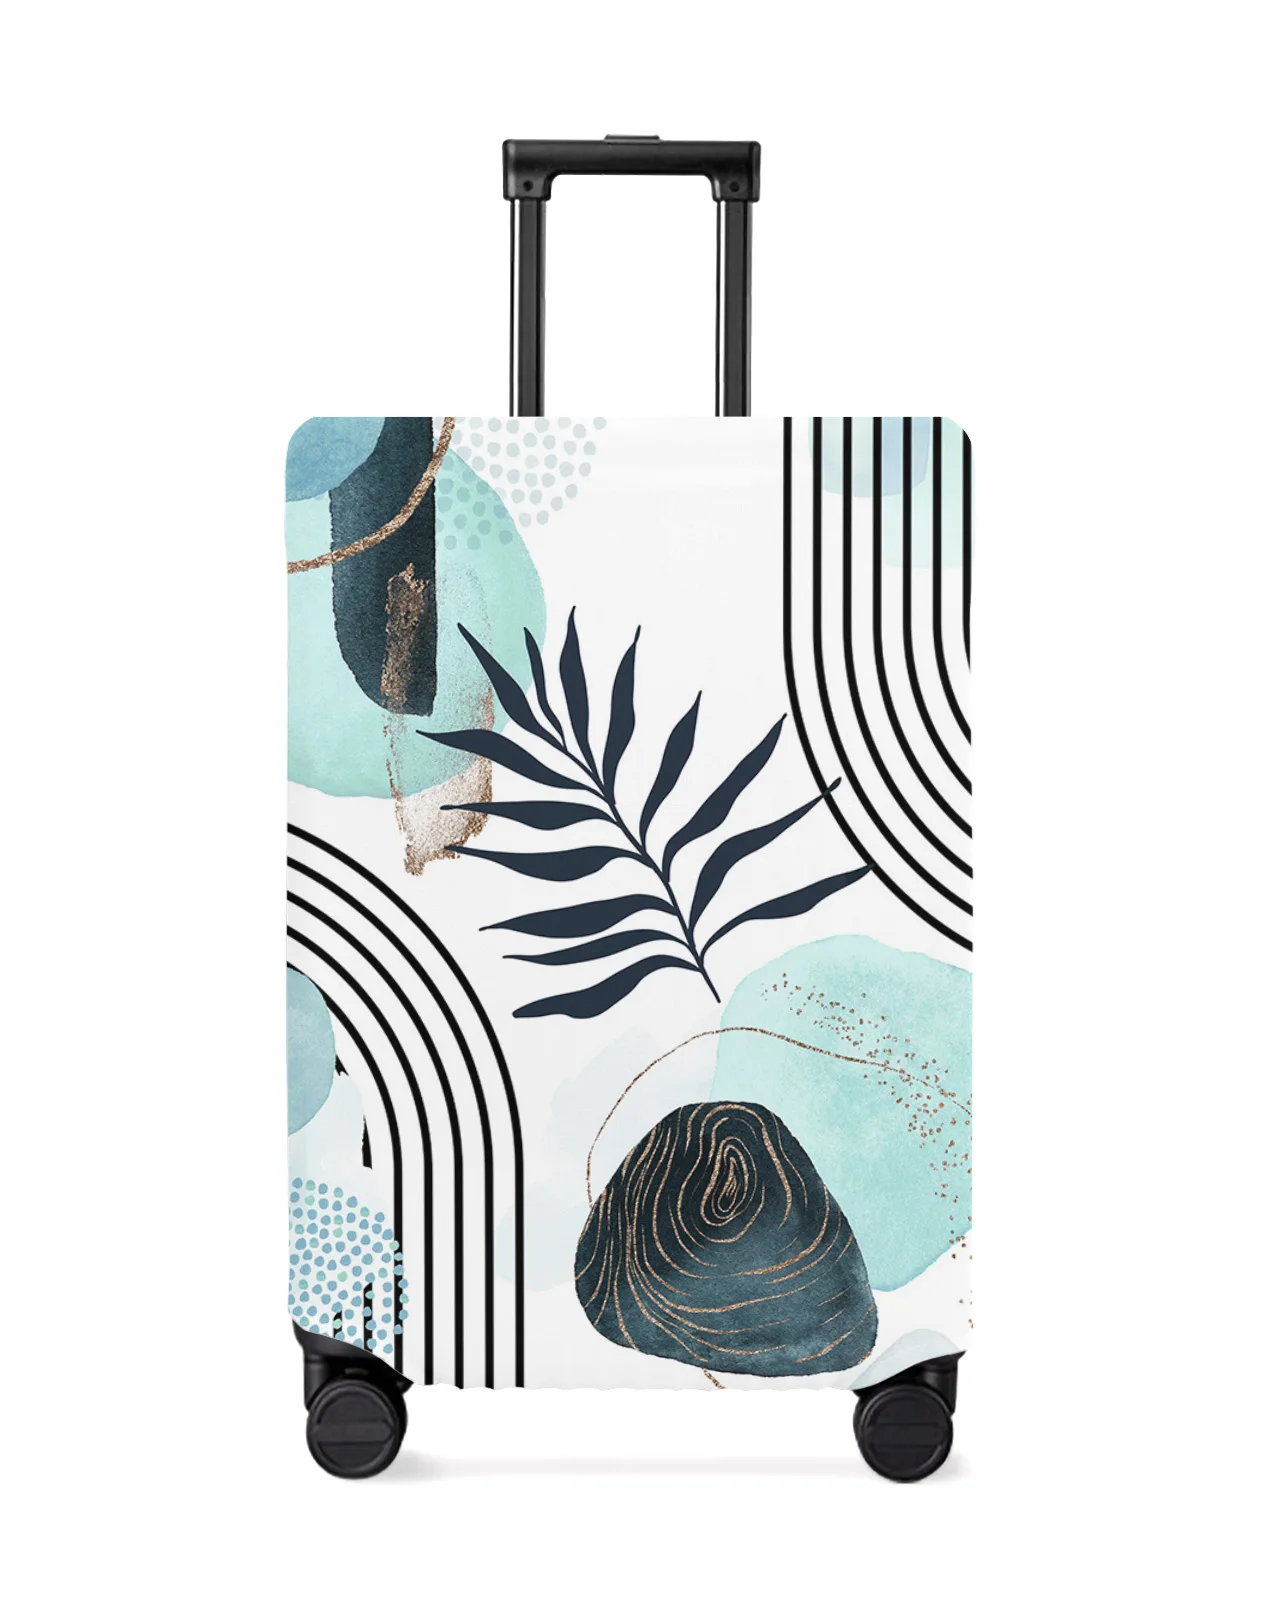 

Abstract Art Leaf Boho Teal Leaves Luggage Cover Stretch Baggage Protector Dust Cover for 18-32 Inch Travel Suitcase Case